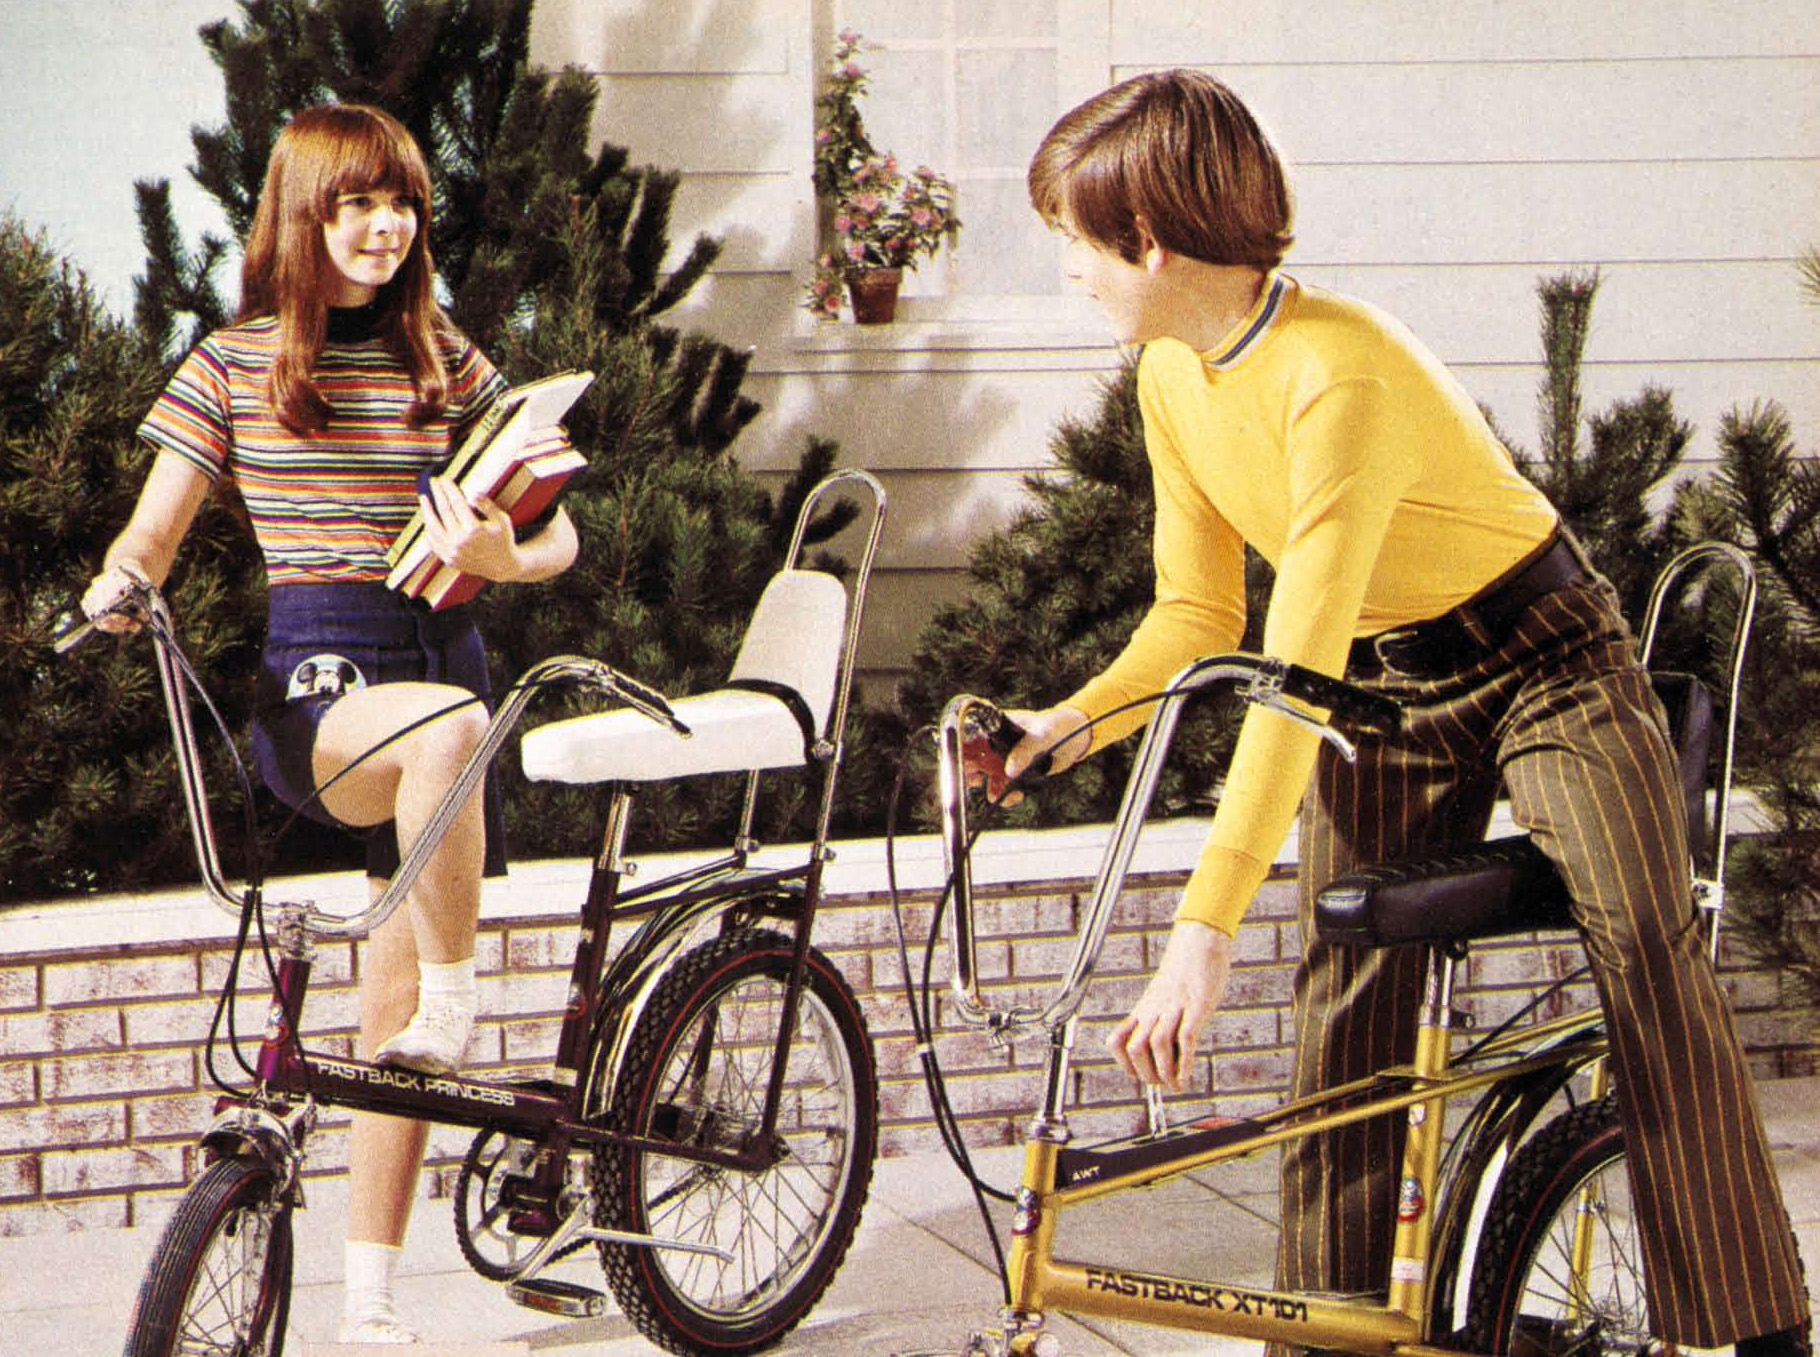 Pedaling Through the '70s: Images of Couples on Bikes - Flashbak